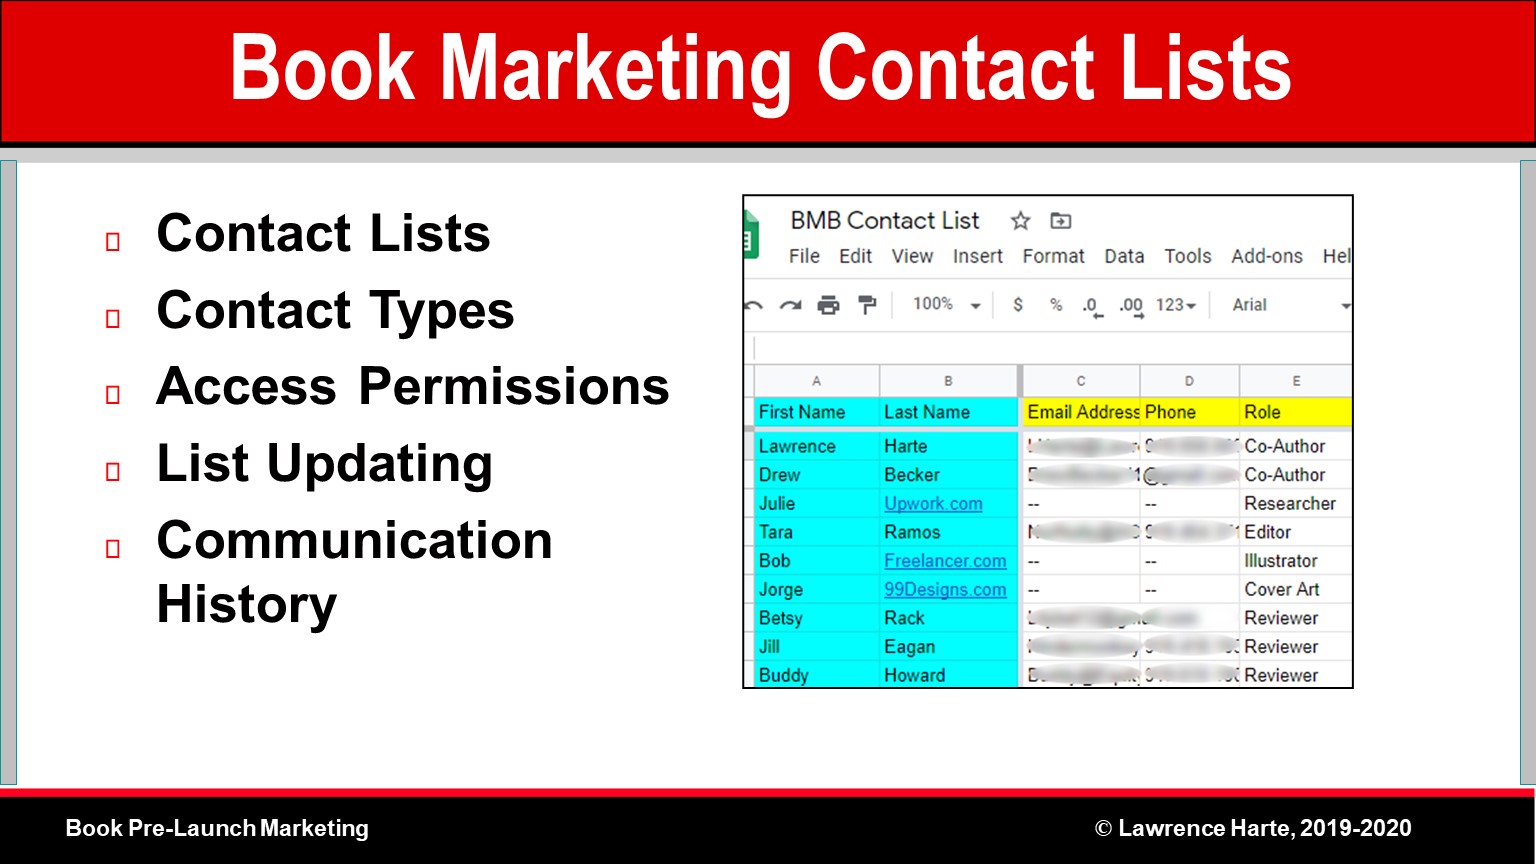 Book Pre-Launch Marketing Contact Lists